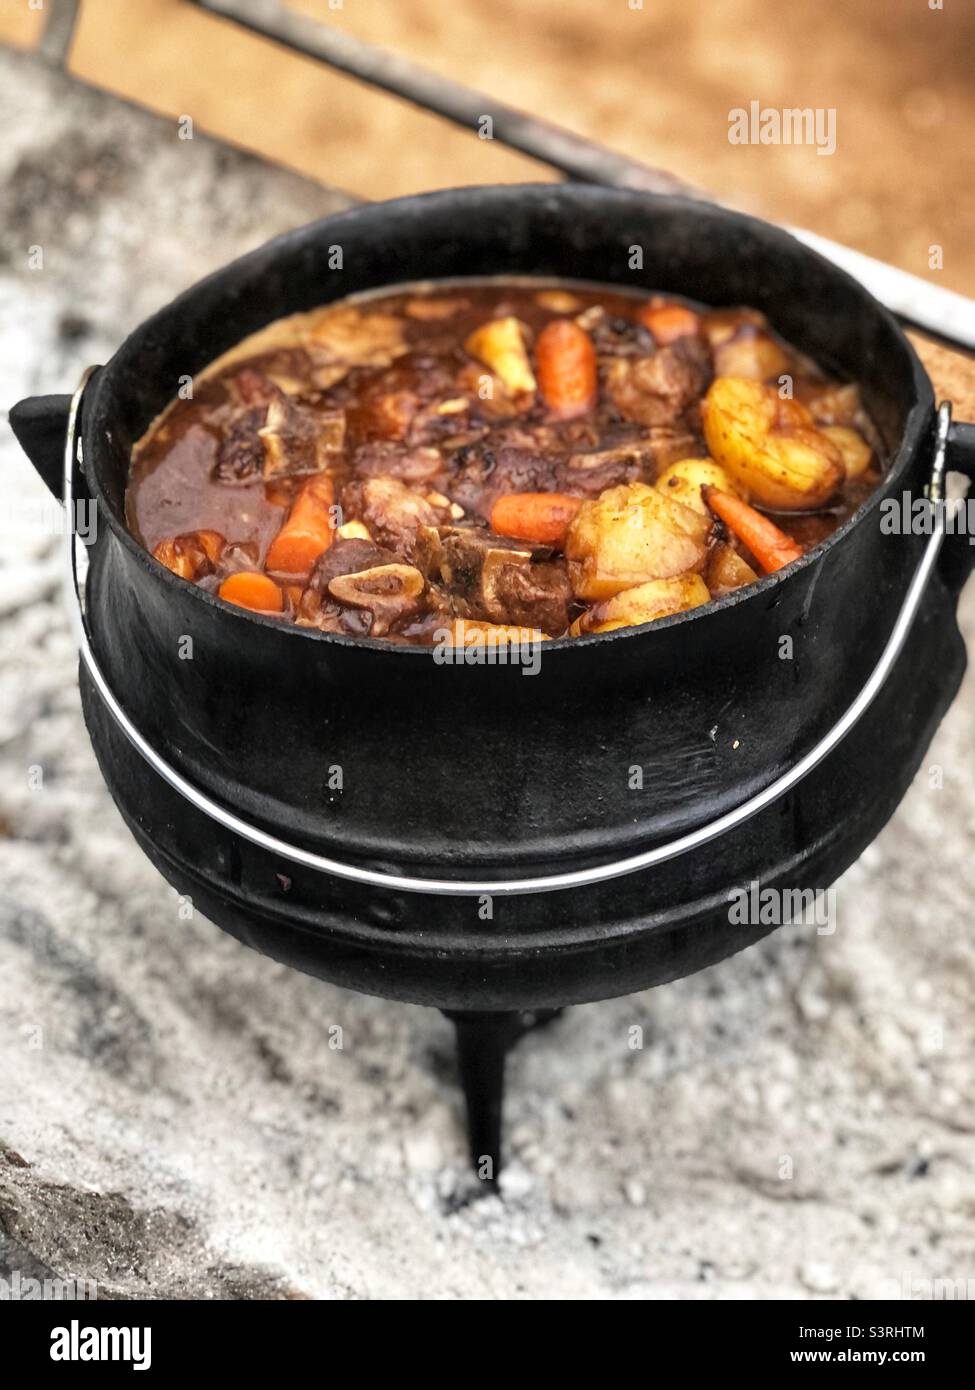 https://c8.alamy.com/comp/S3RHTM/a-traditional-south-african-dish-called-a-potjie-which-is-like-a-stew-but-is-cooked-on-hot-coals-in-this-traditional-potjie-pot-S3RHTM.jpg